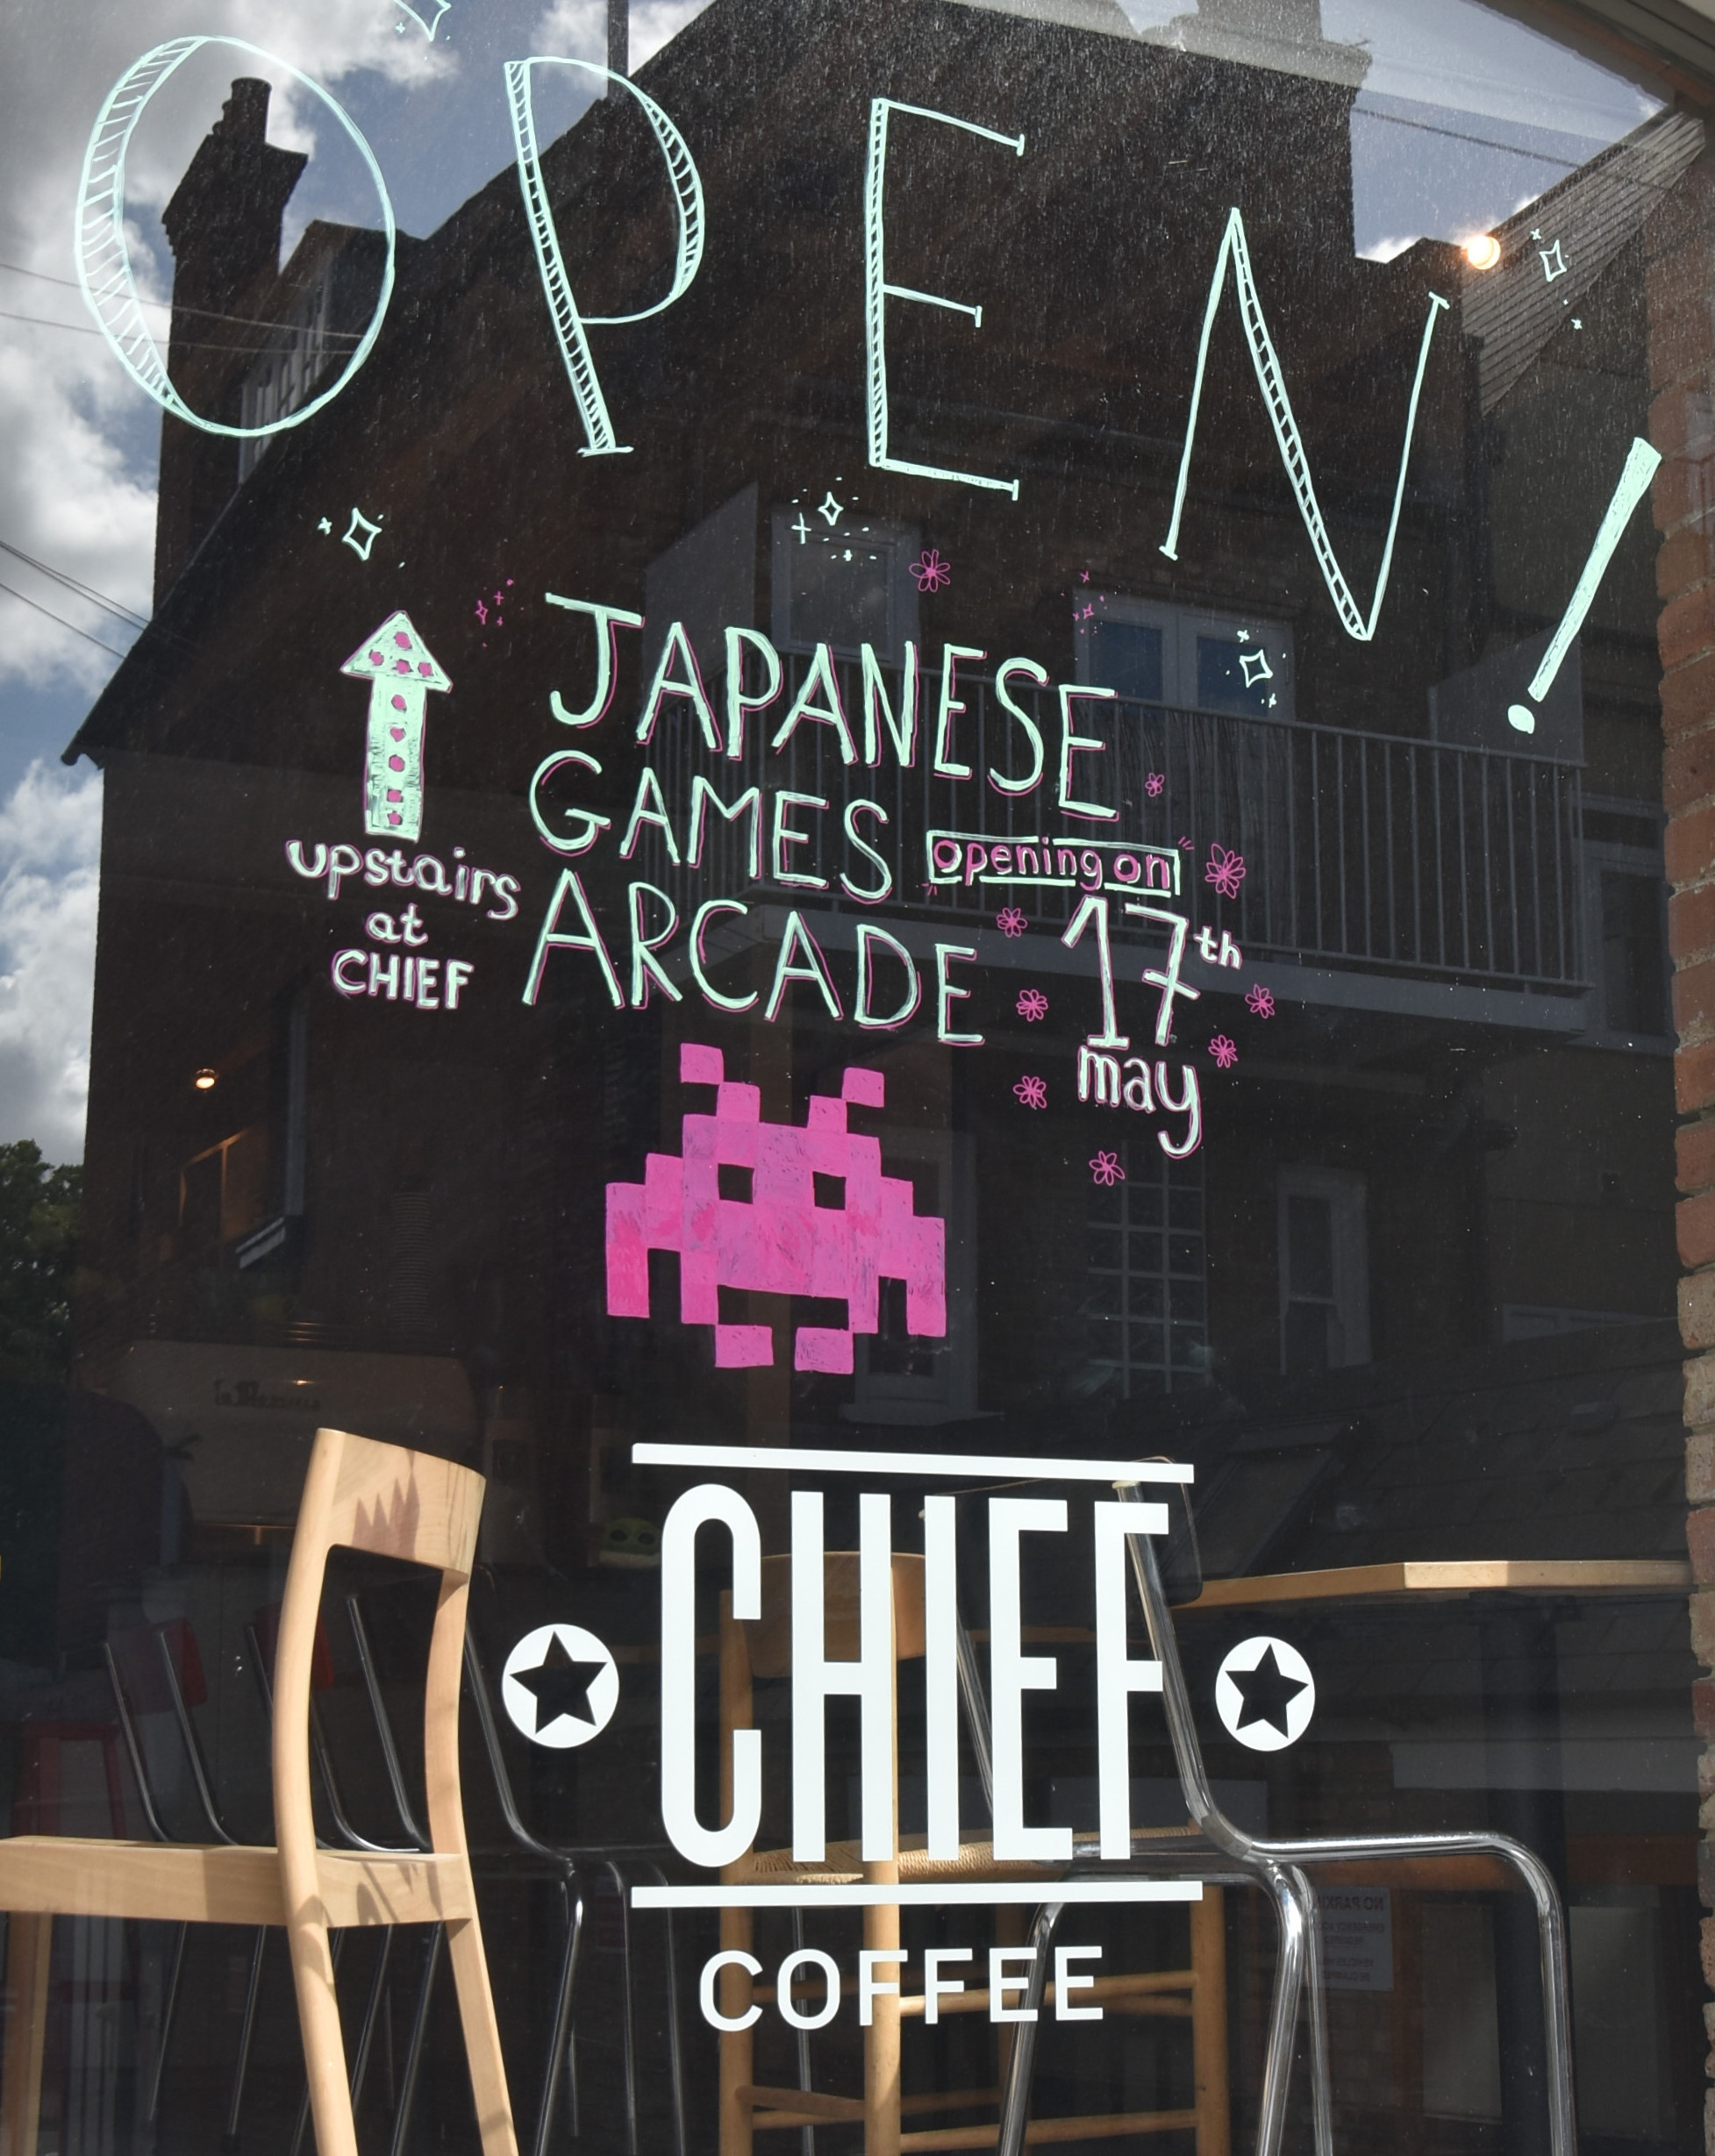 The front window of Chief Coffee celebrating the opening of the Japanese games arcade on the top floor.